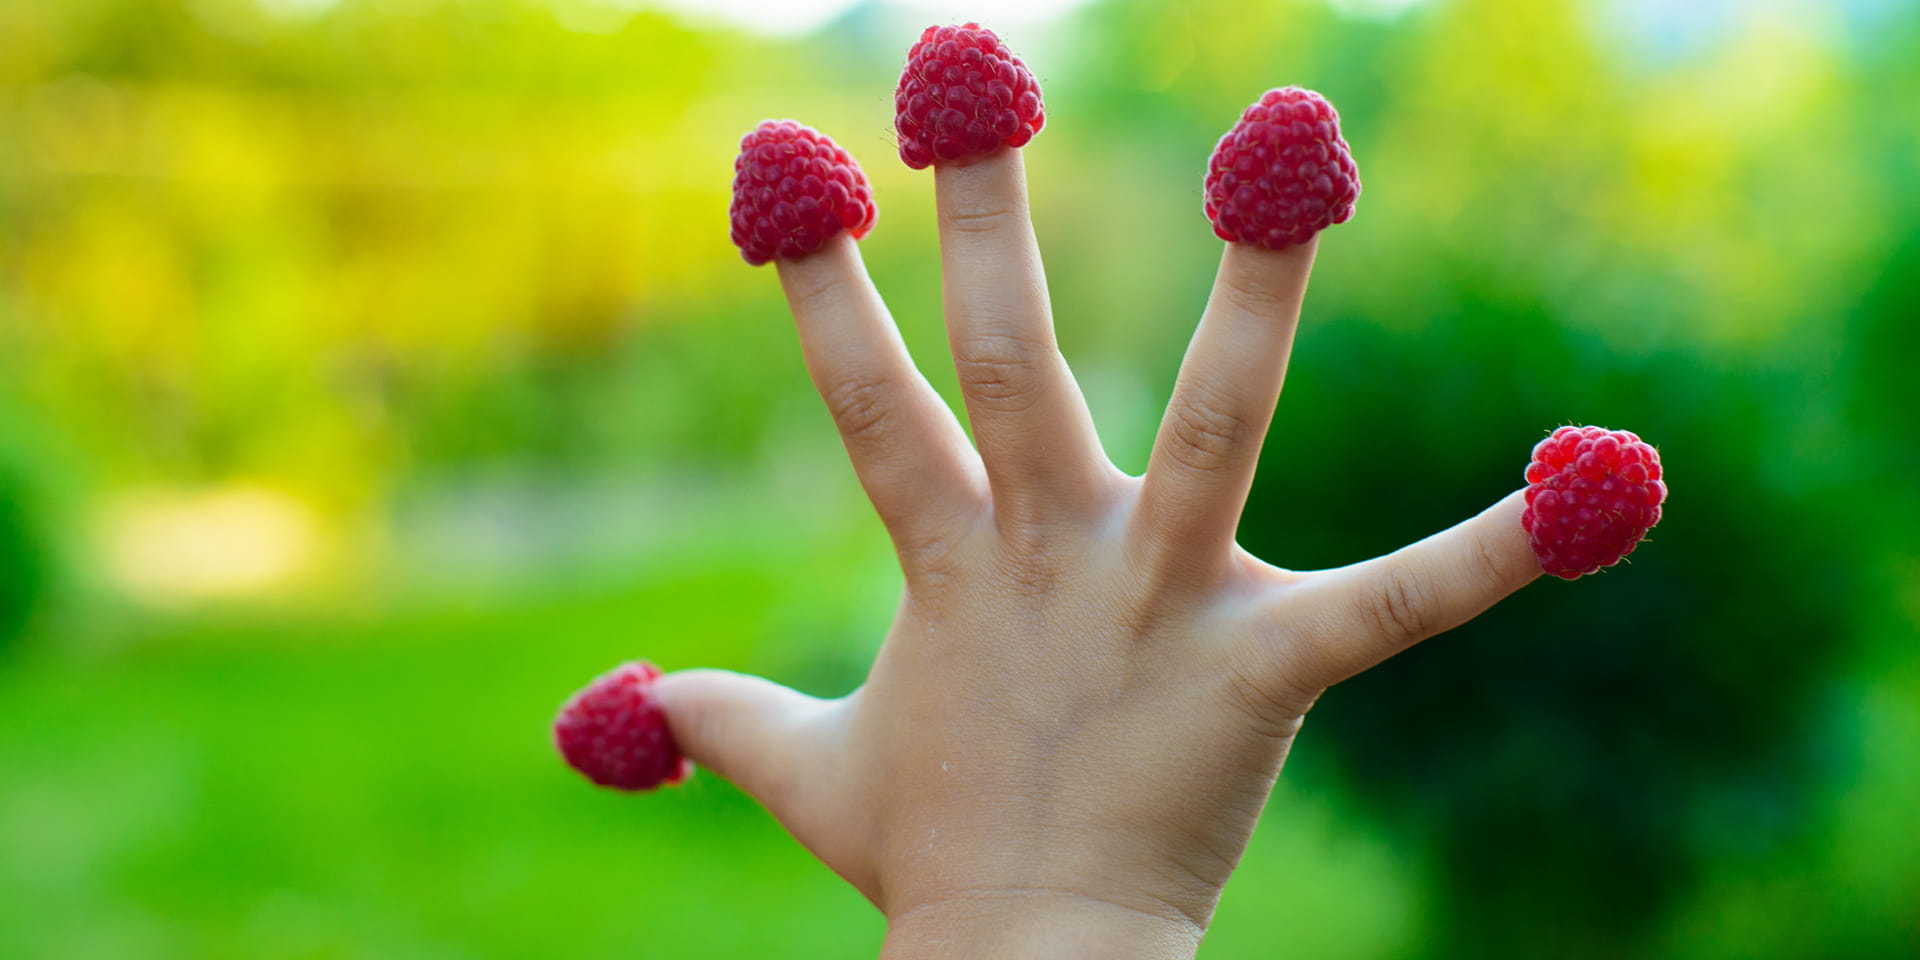 child's hand with raspberries on the tip of each finger